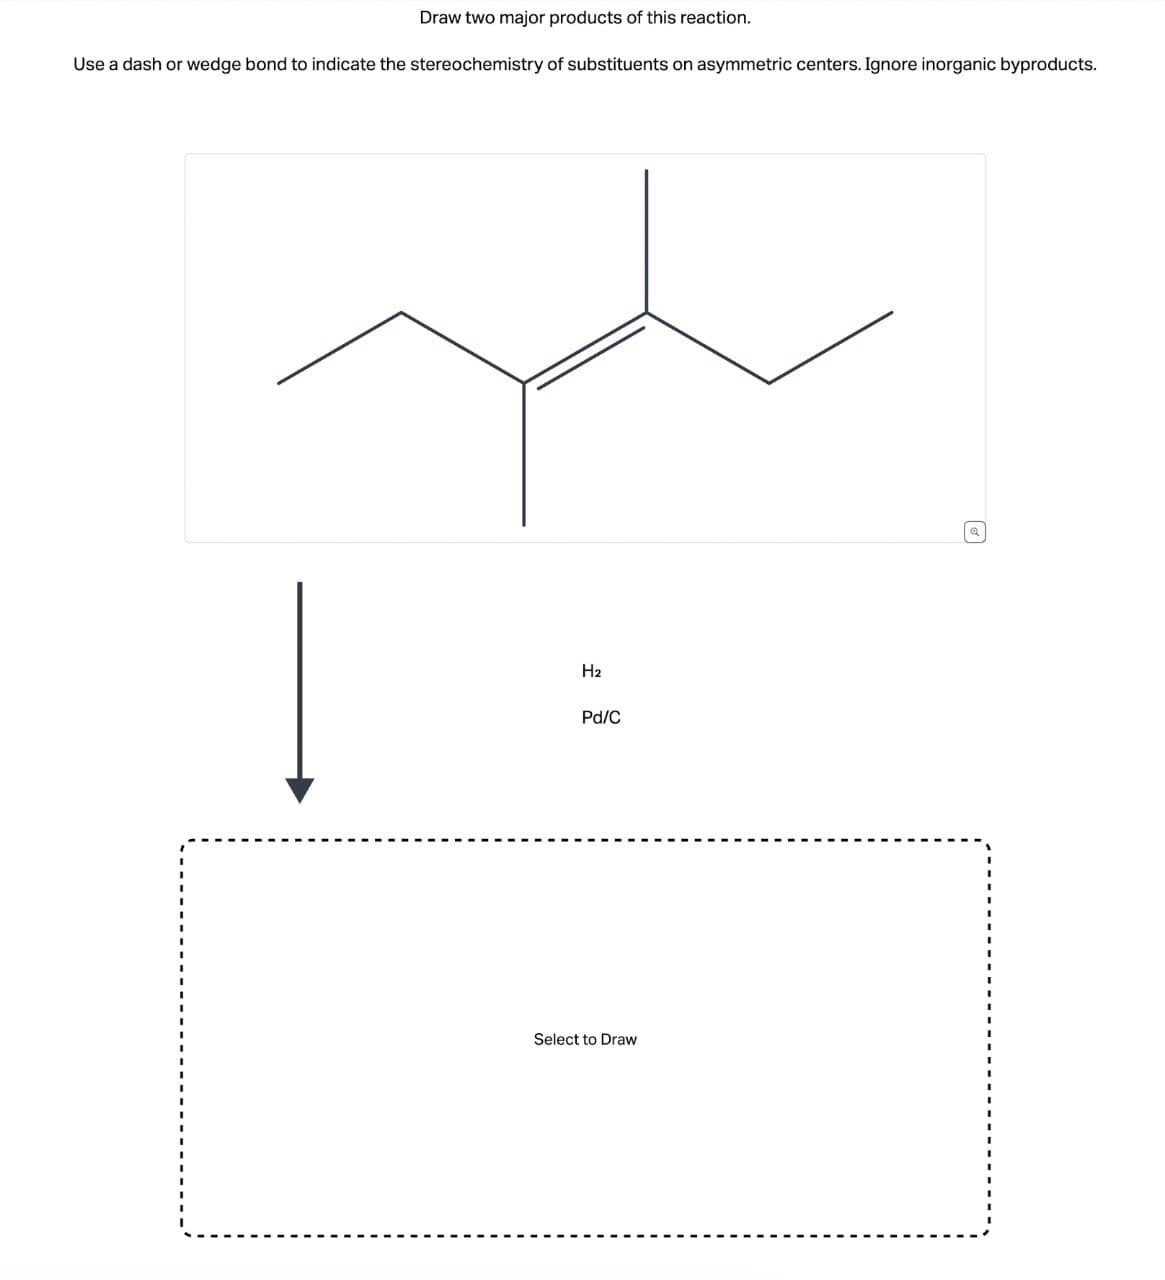 Draw two major products of this reaction.
Use a dash or wedge bond to indicate the stereochemistry of substituents on asymmetric centers. Ignore inorganic byproducts.
H2
Pd/C
Select to Draw
Q